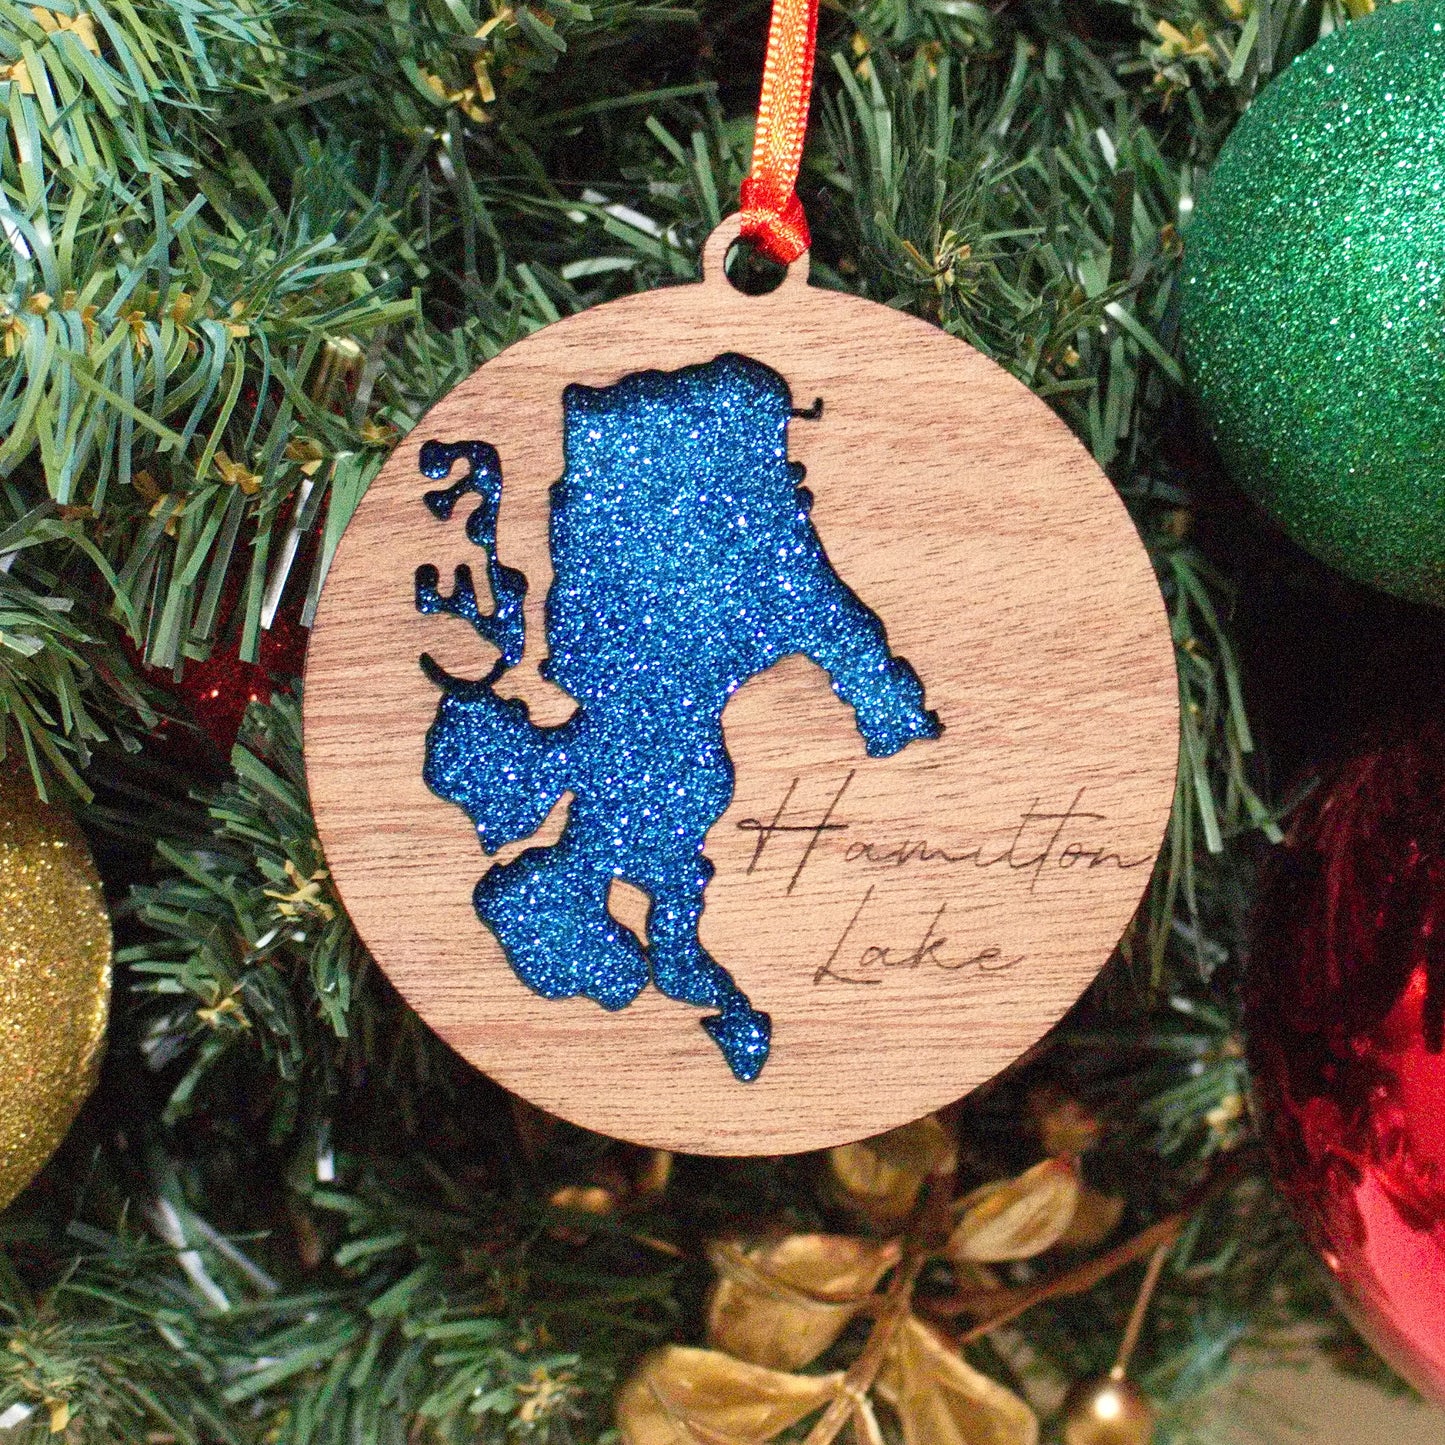 Hamilton Lake Christmas ornament for the family to remember time spent together on the lake. Made out of wood and acrylic with attention to detail. This is something you will love.